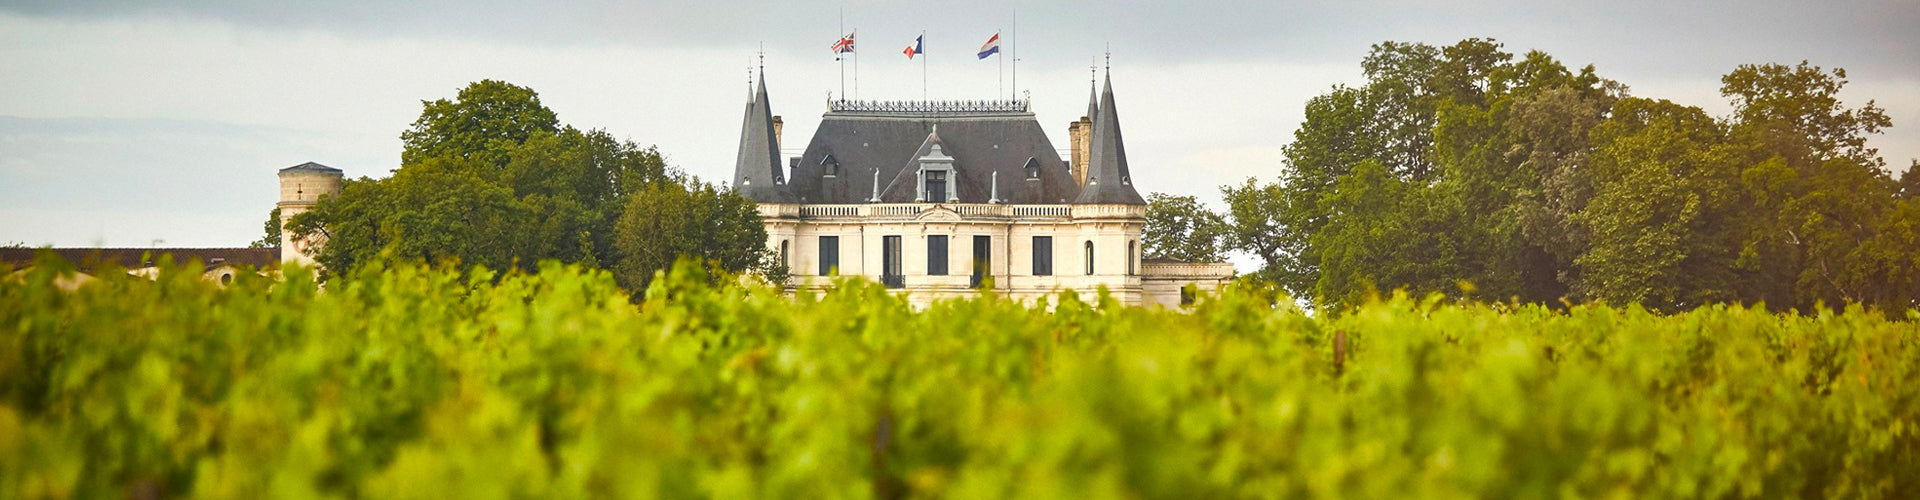 The Château Palmer estate in Margaux as viewed through the vineyards